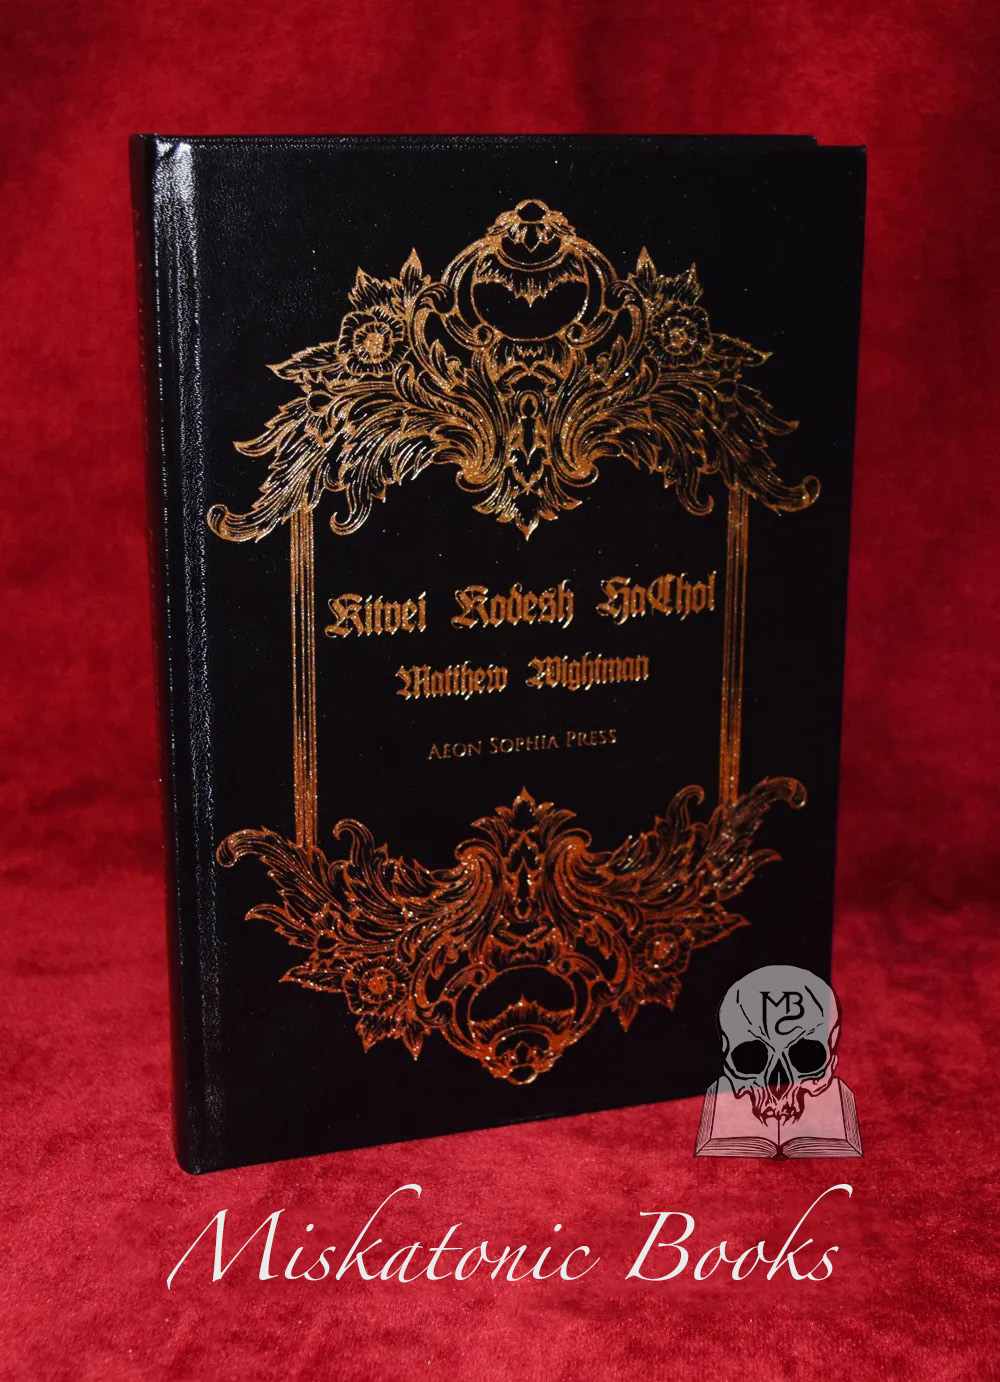 KITVEI KODESH HACHOL by Matthew Wightman - Deluxe Leather Bound Limited Edition